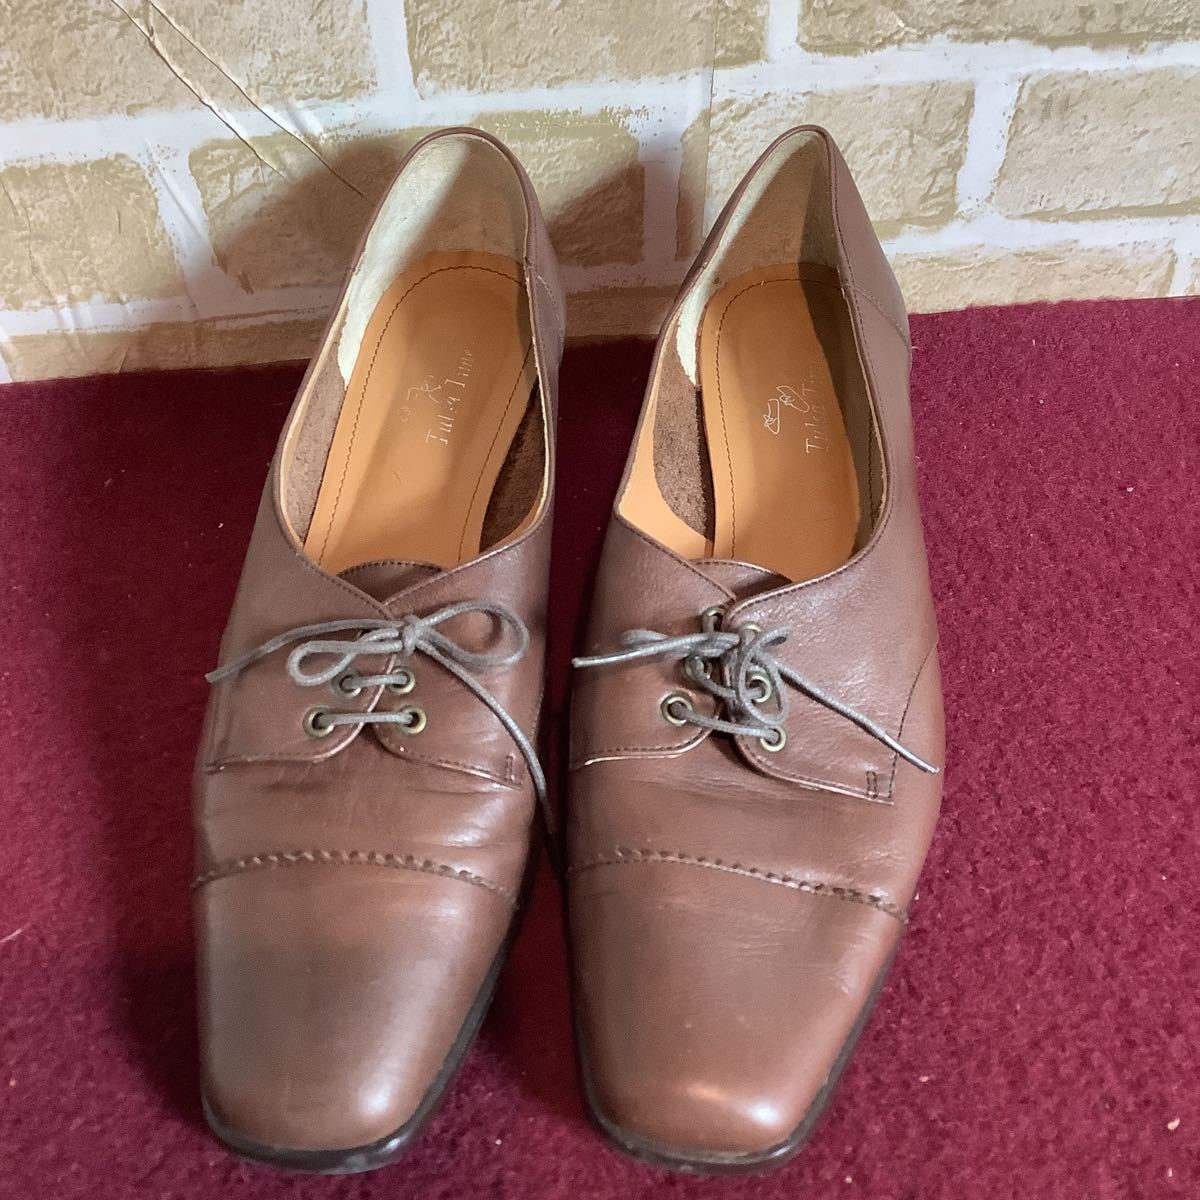 [ selling out! free shipping!]A-249 Tulsa Time! race up pumps! Brown!25.0cm EE! made in Japan! on a grand scale .. pretty shoes! heel pumps! used!